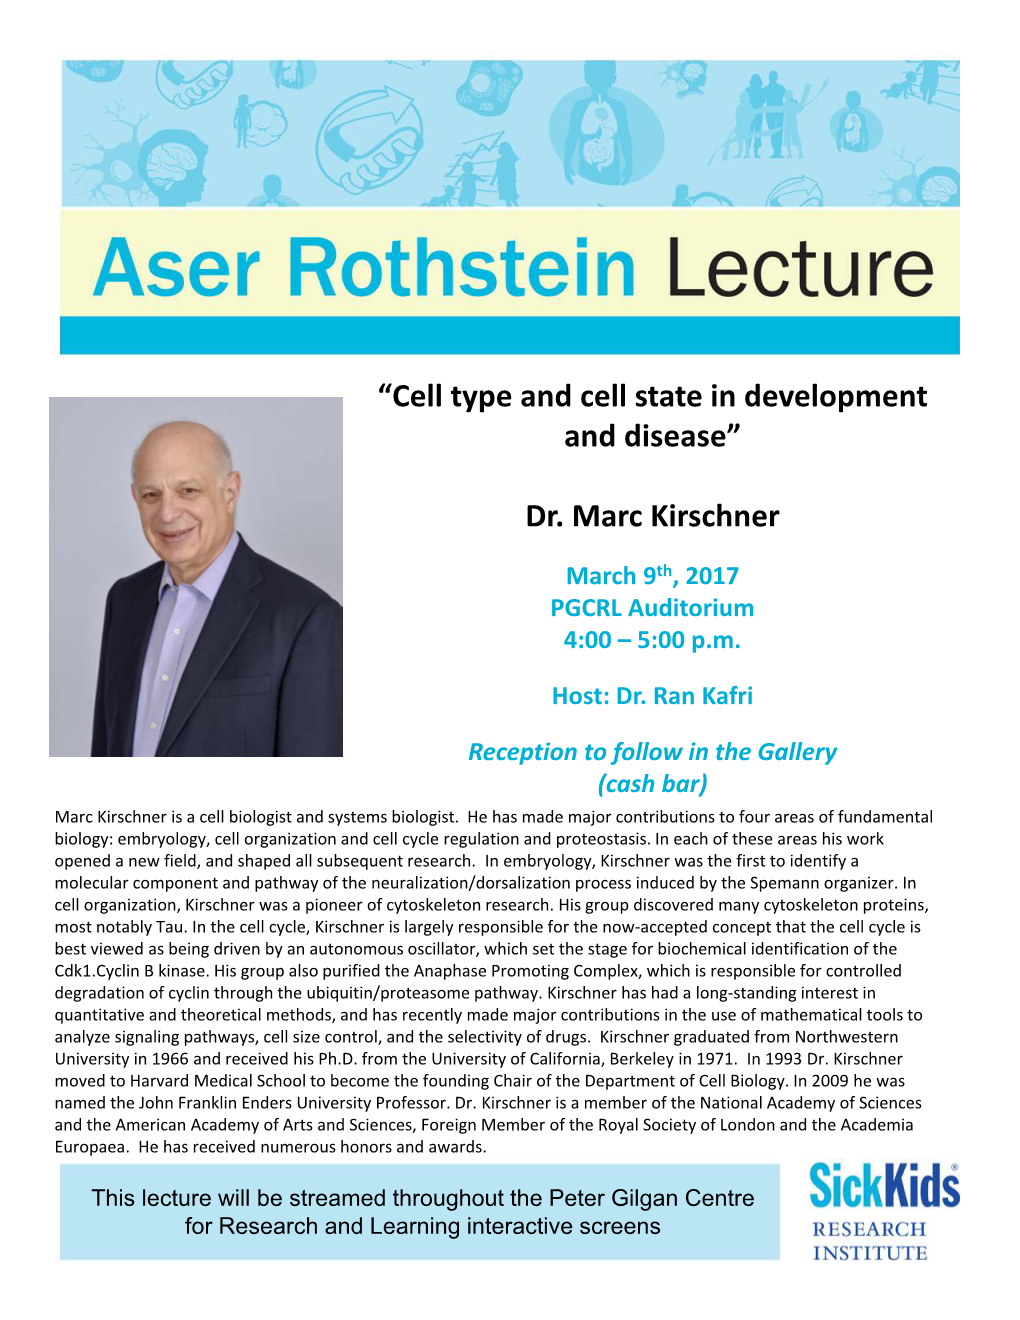 “Cell Type and Cell State in Development and Disease” Dr. Marc Kirschner